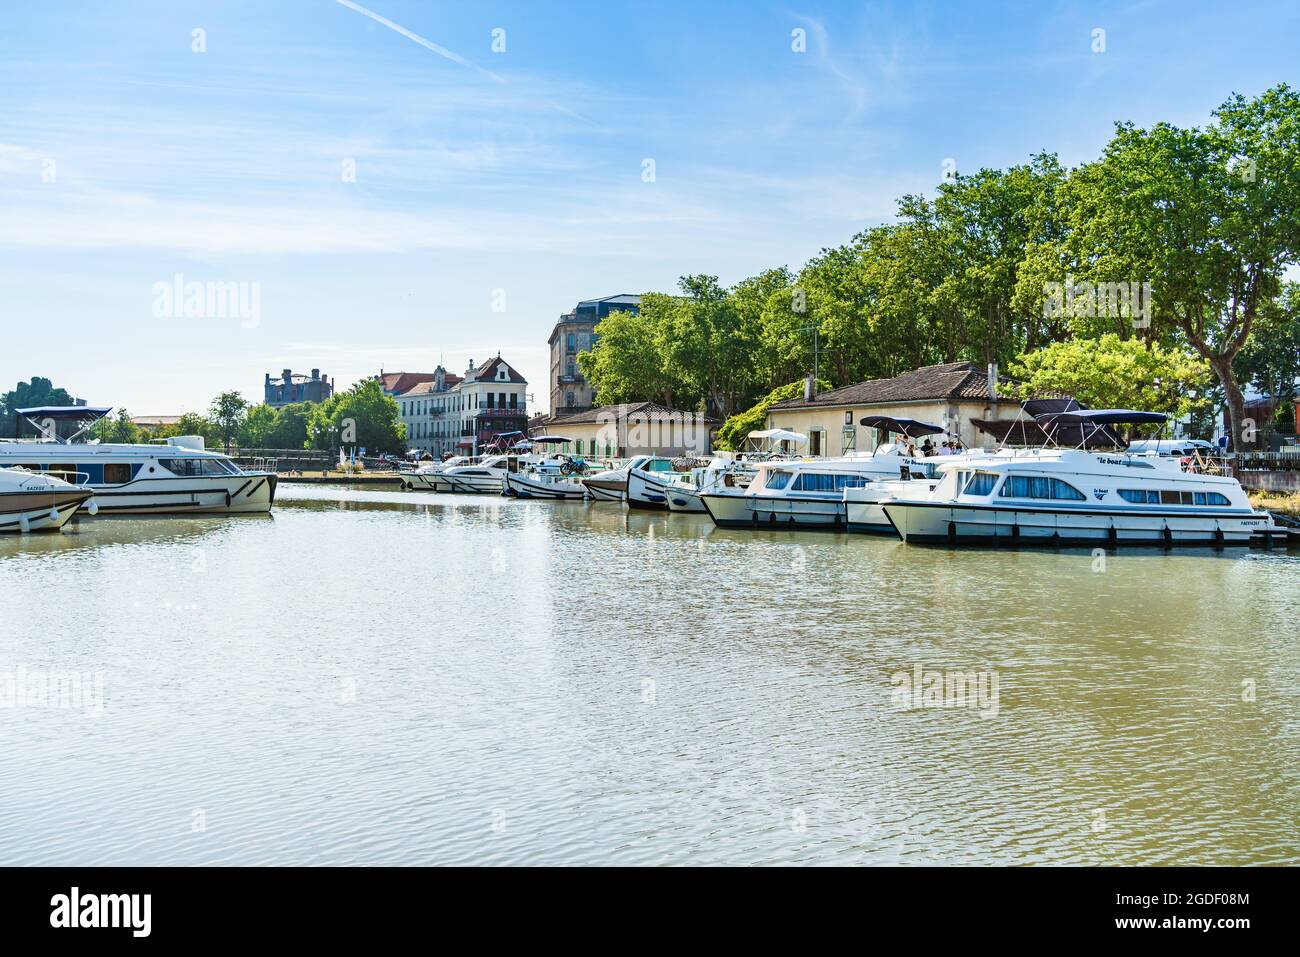 Carcassonne, France. August 3, 2021. Leisure boats moored in Carcassonne Port, Canal du Midi. Stock Photo